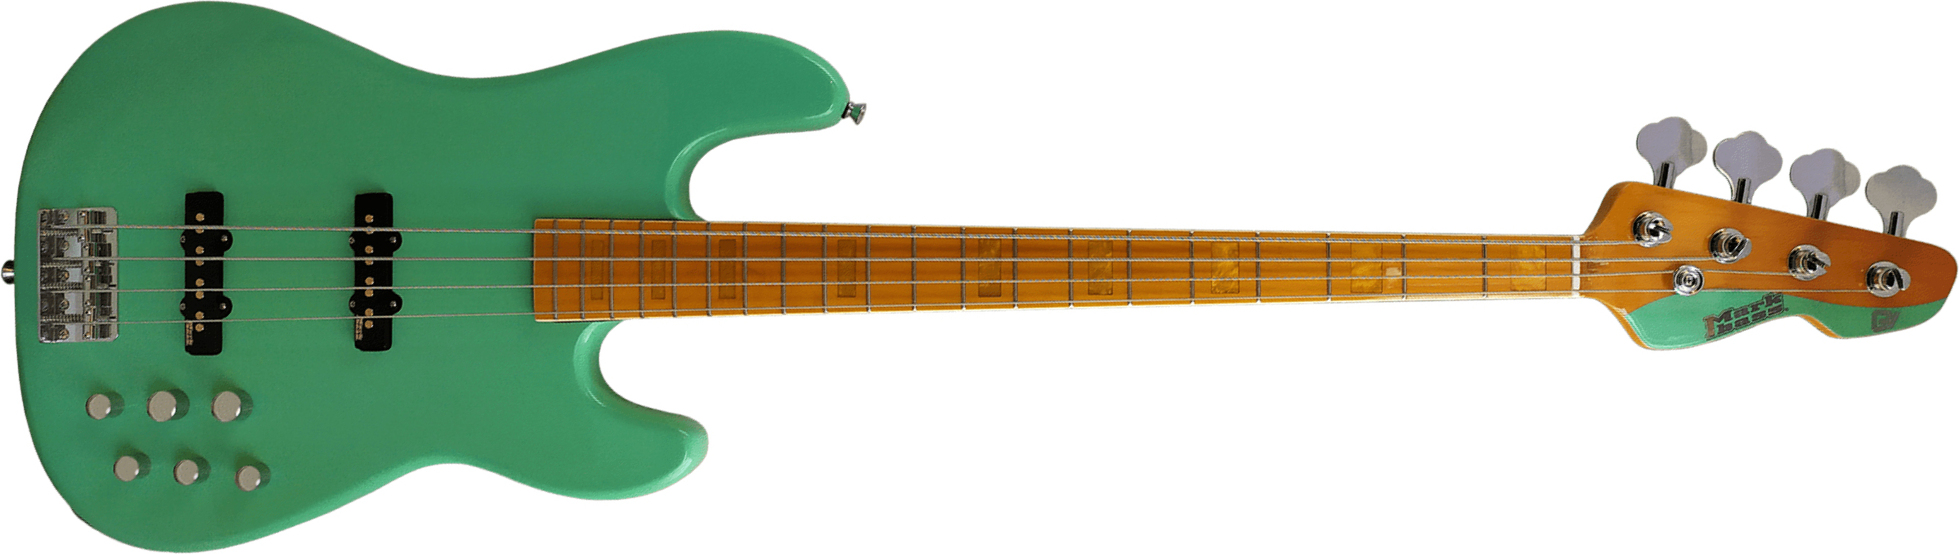 Markbass Mb Gv 4 Gloxy Val Cr Mp Active Mn - Surf Green - Solid body electric bass - Main picture